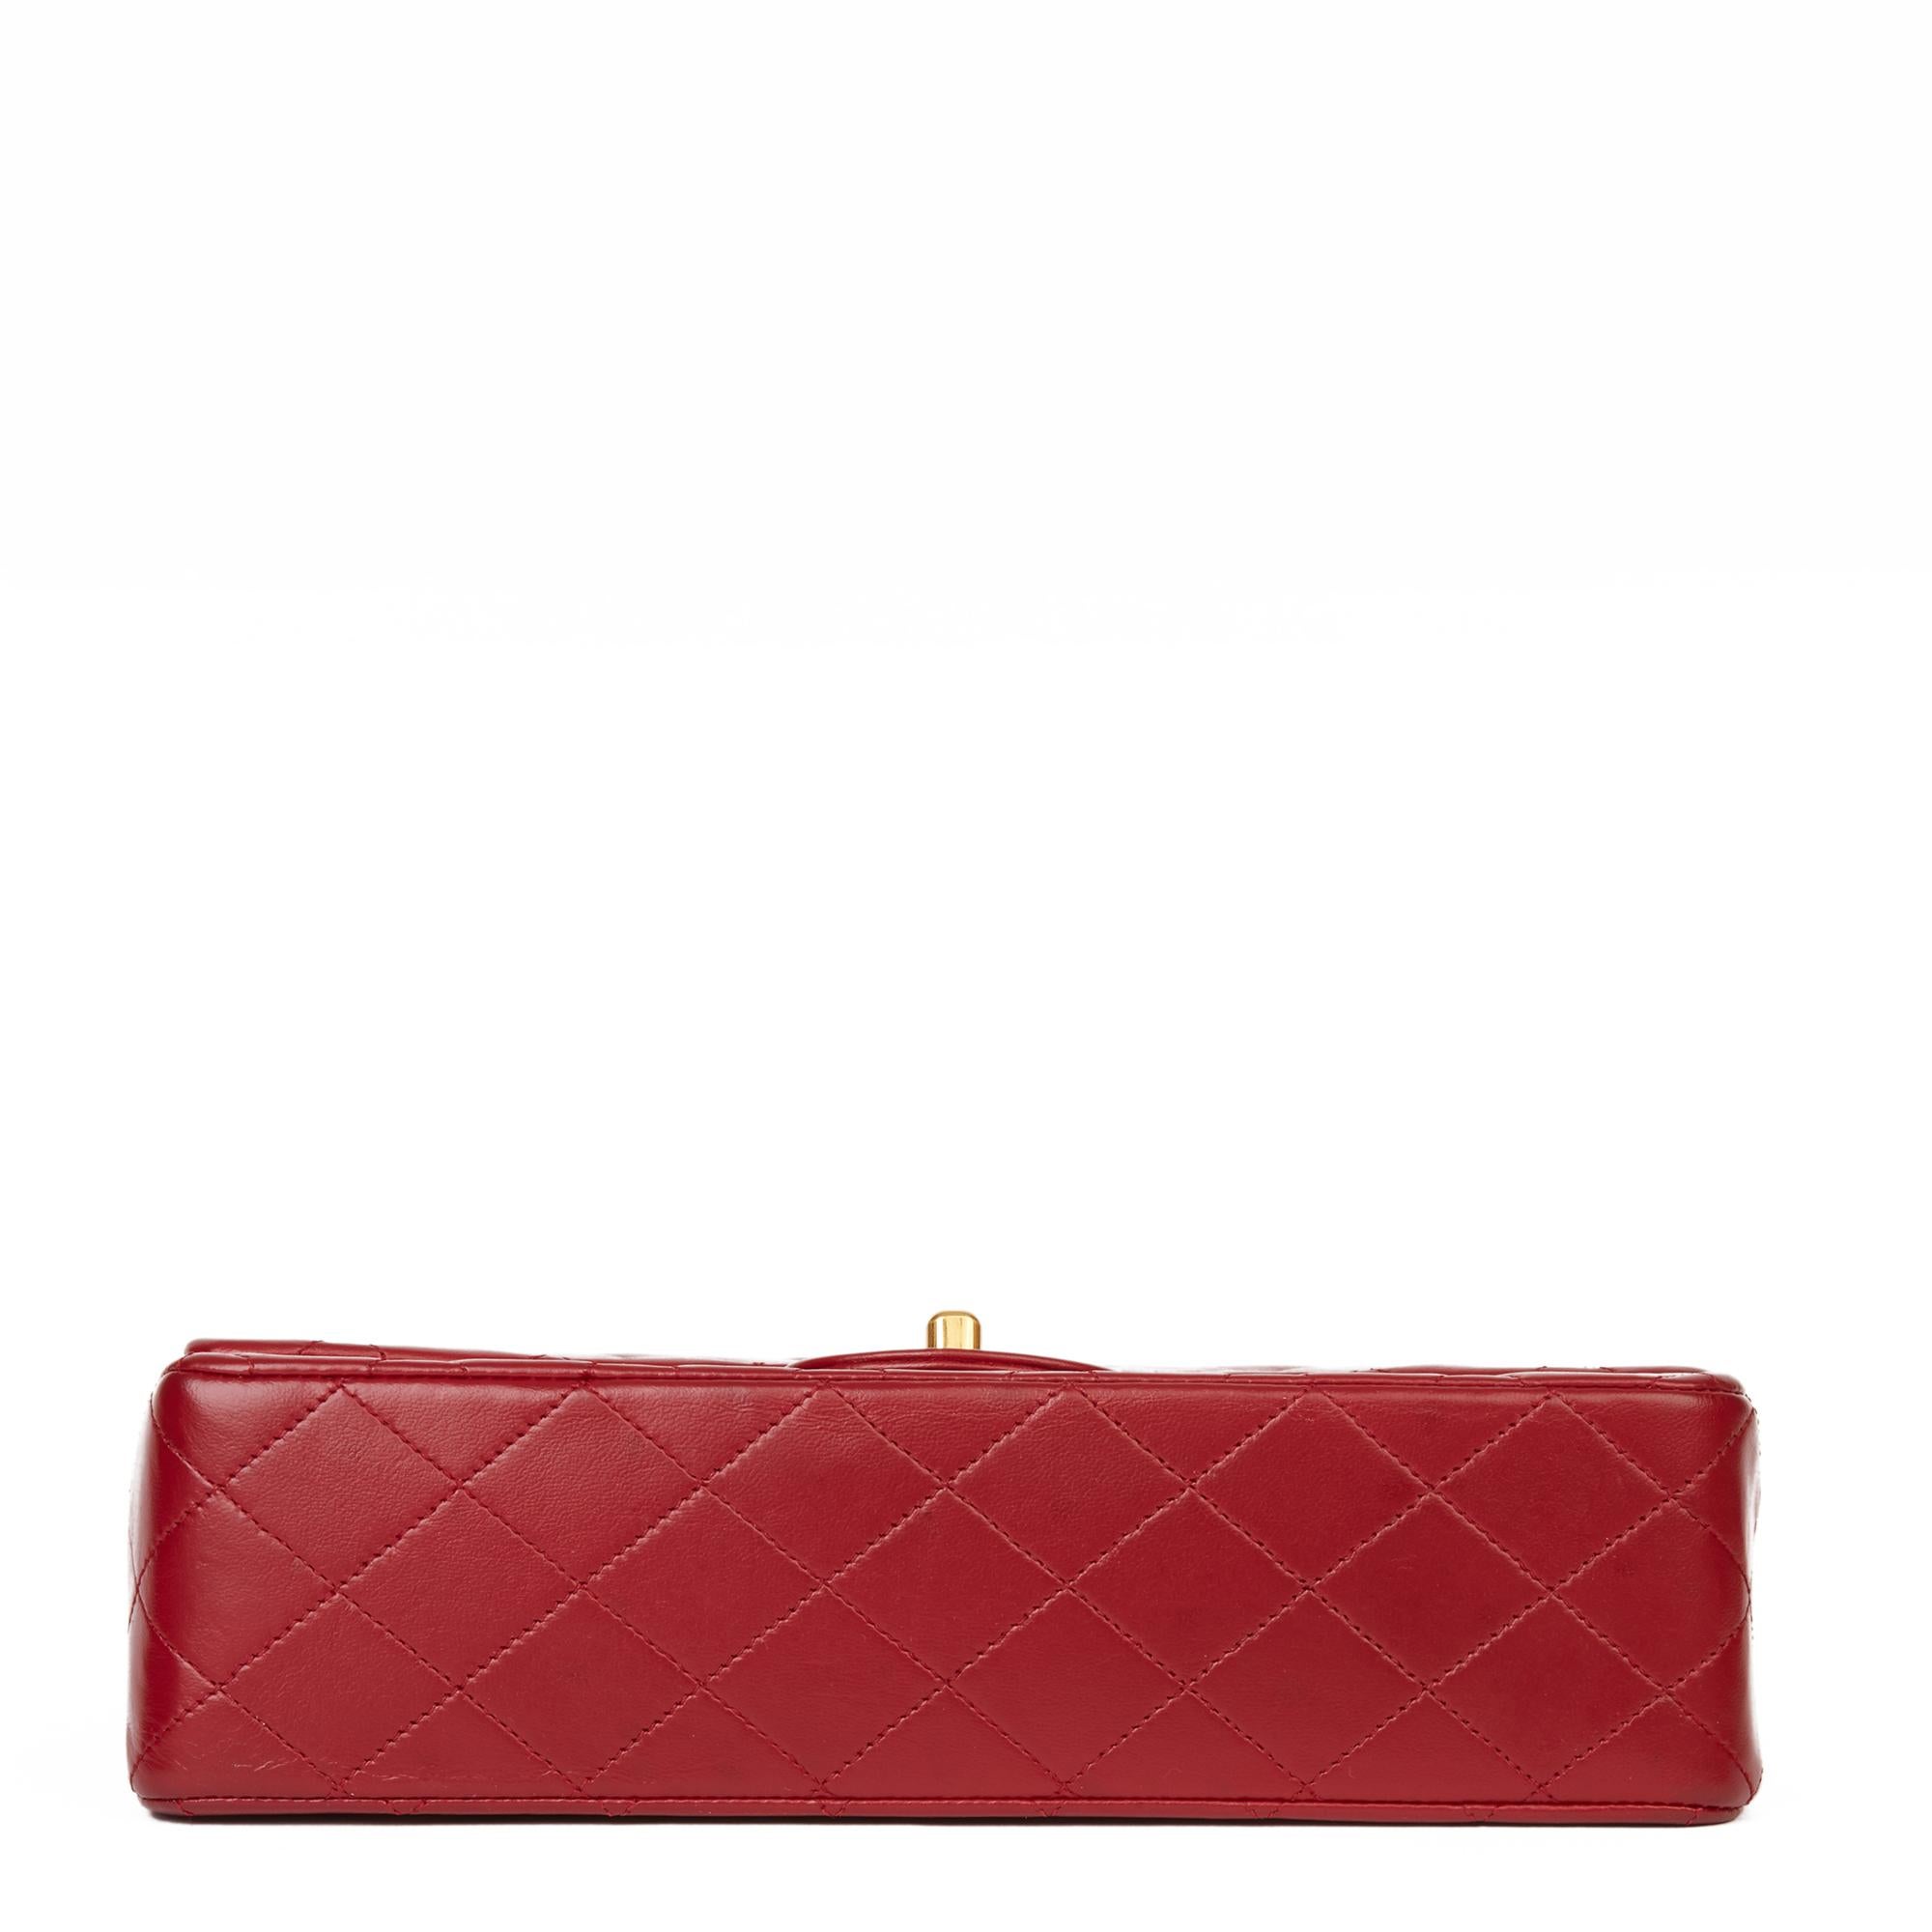 1991 Chanel Red Quilted Lambskin Vintage Medium Classic Double Flap Bag 2